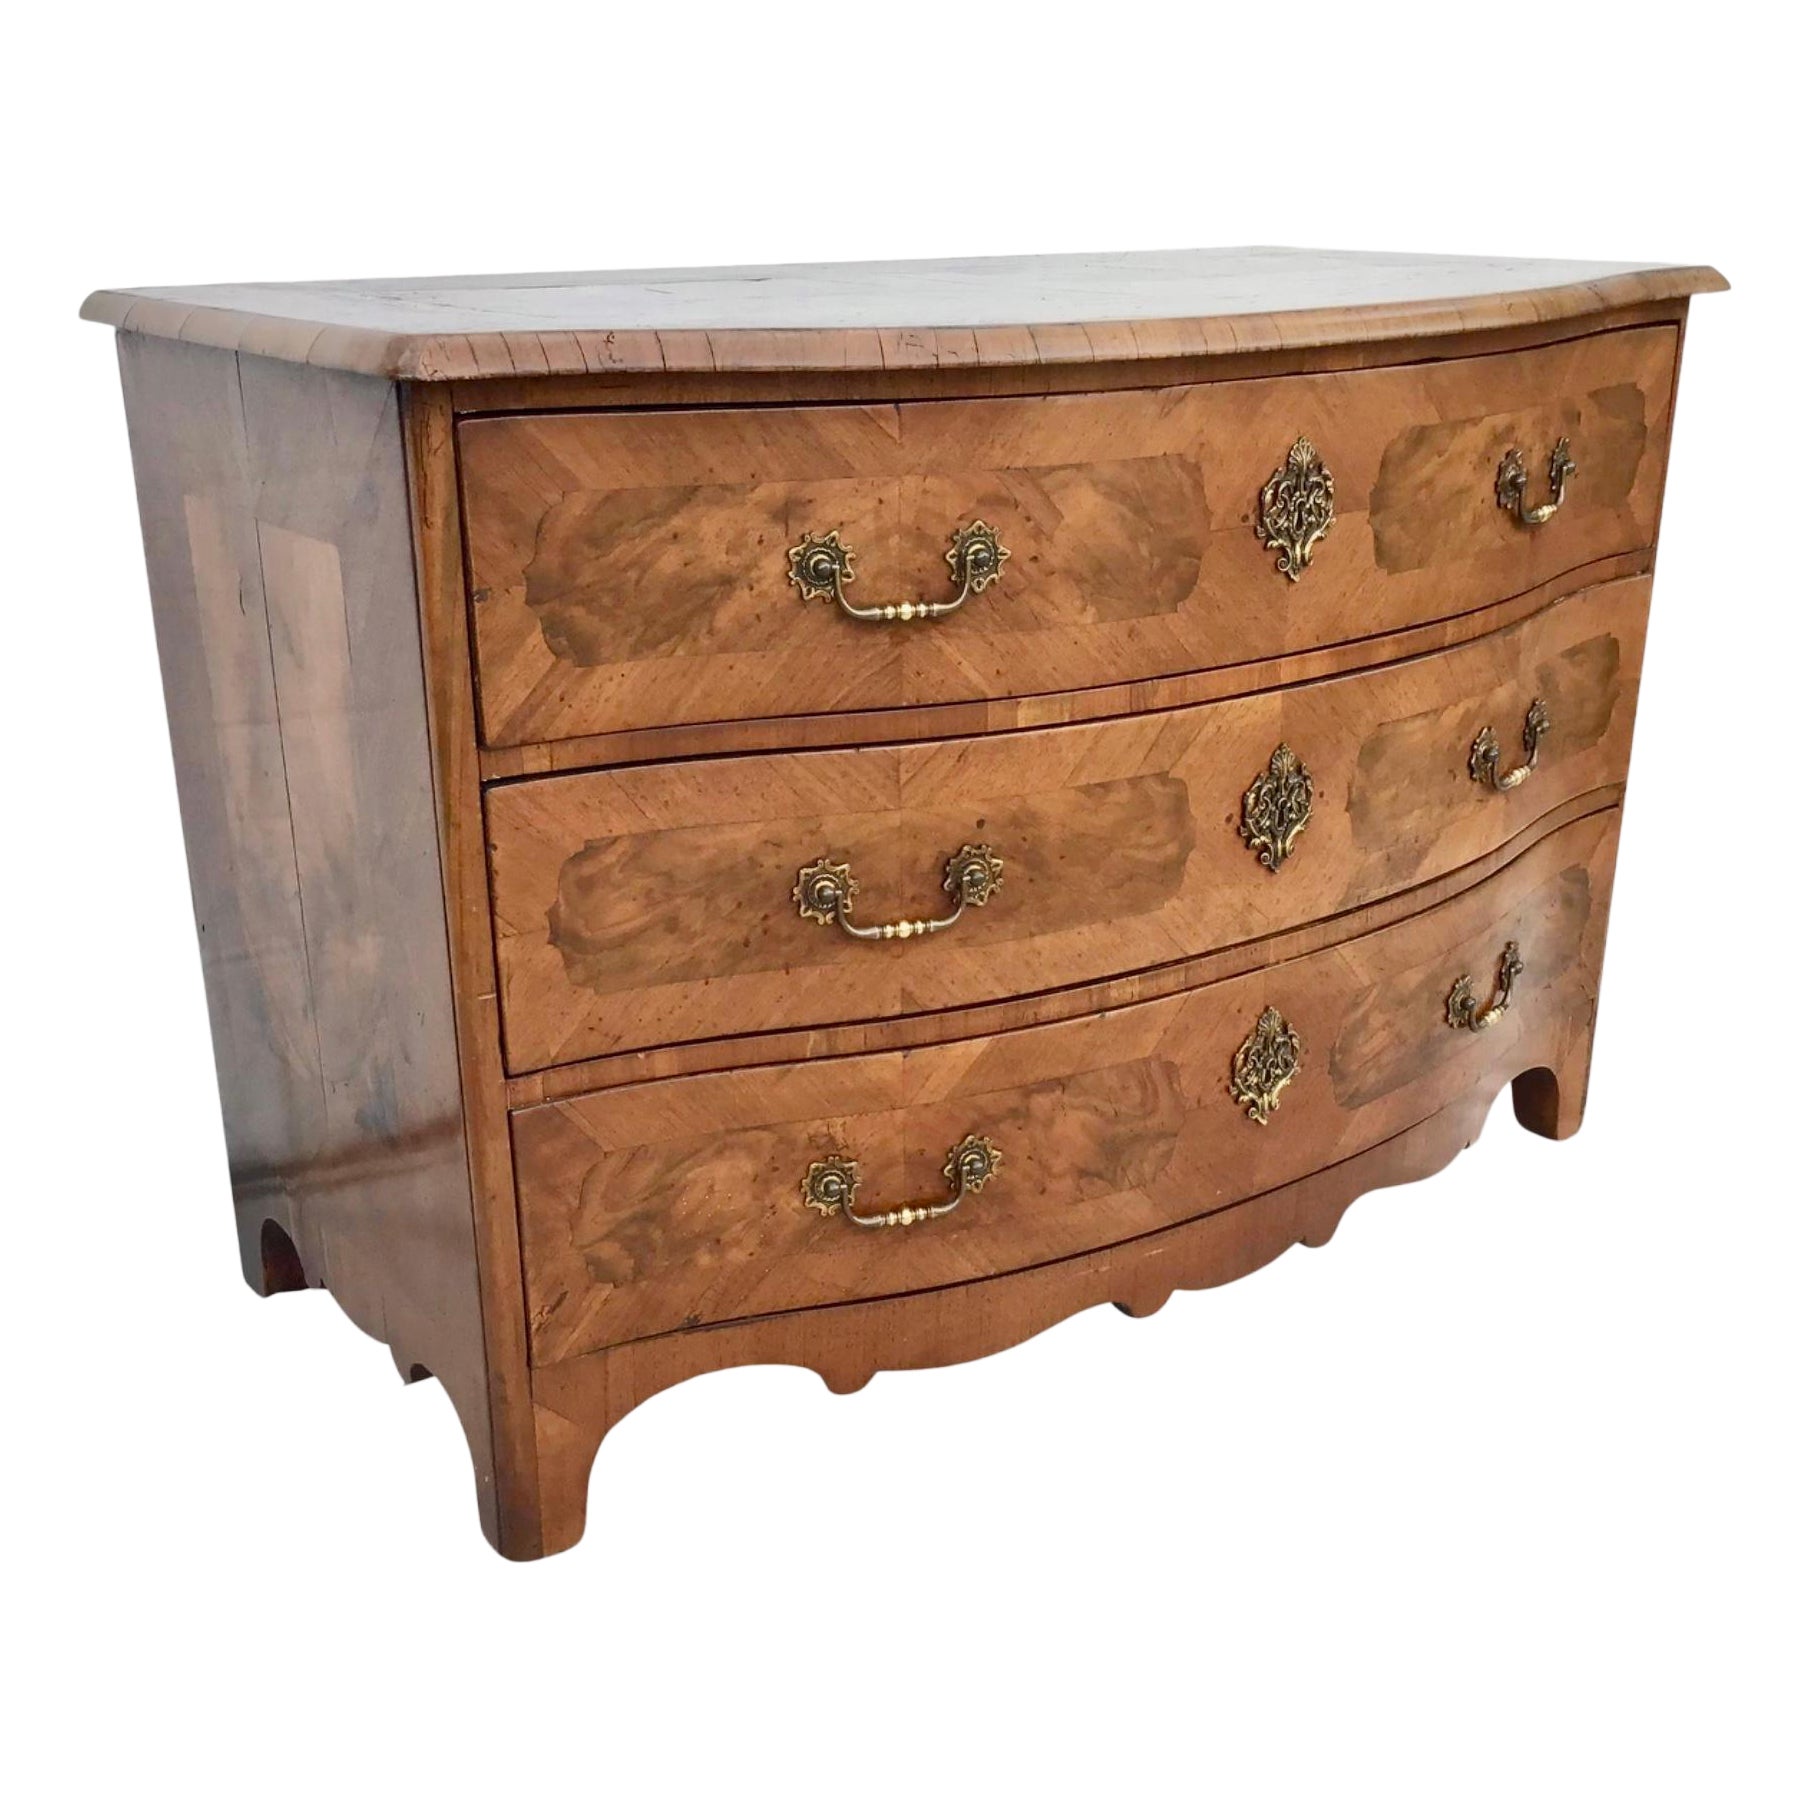 18th Century German Baroque Chest of Drawers - Commode For Sale